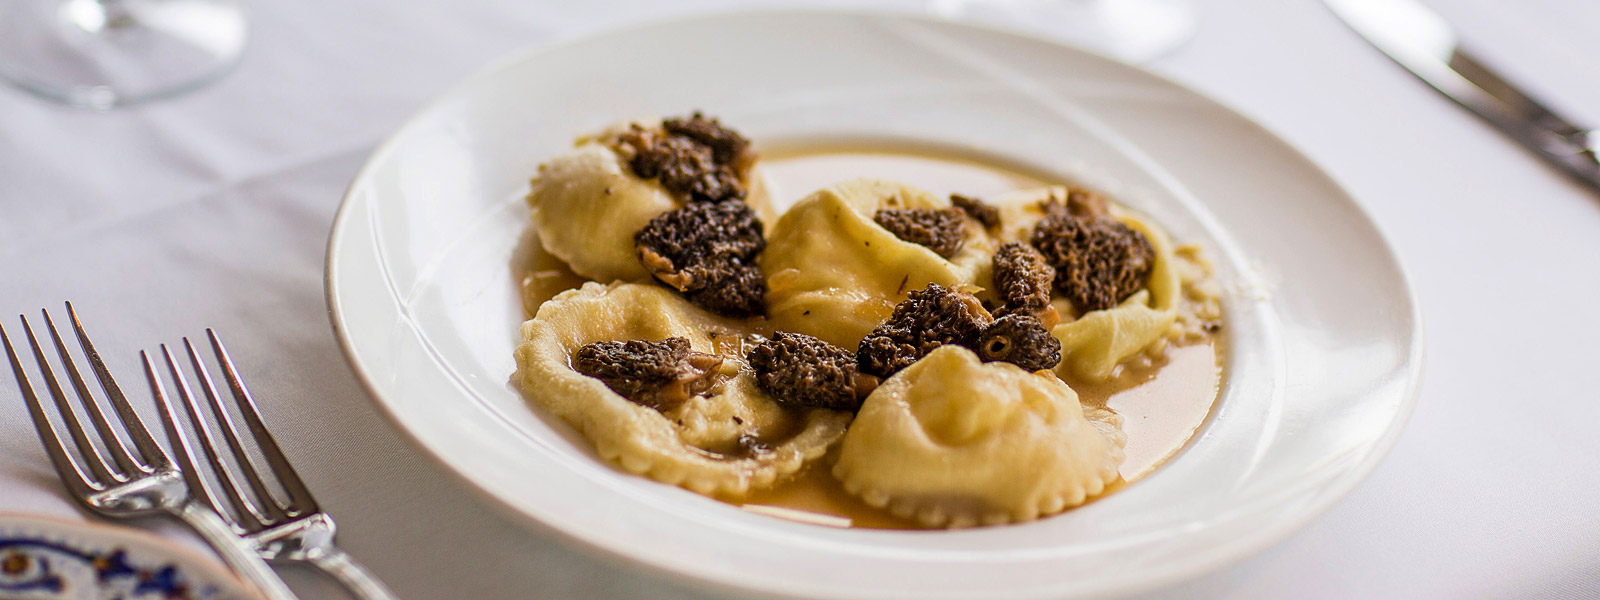 Pasta with morels